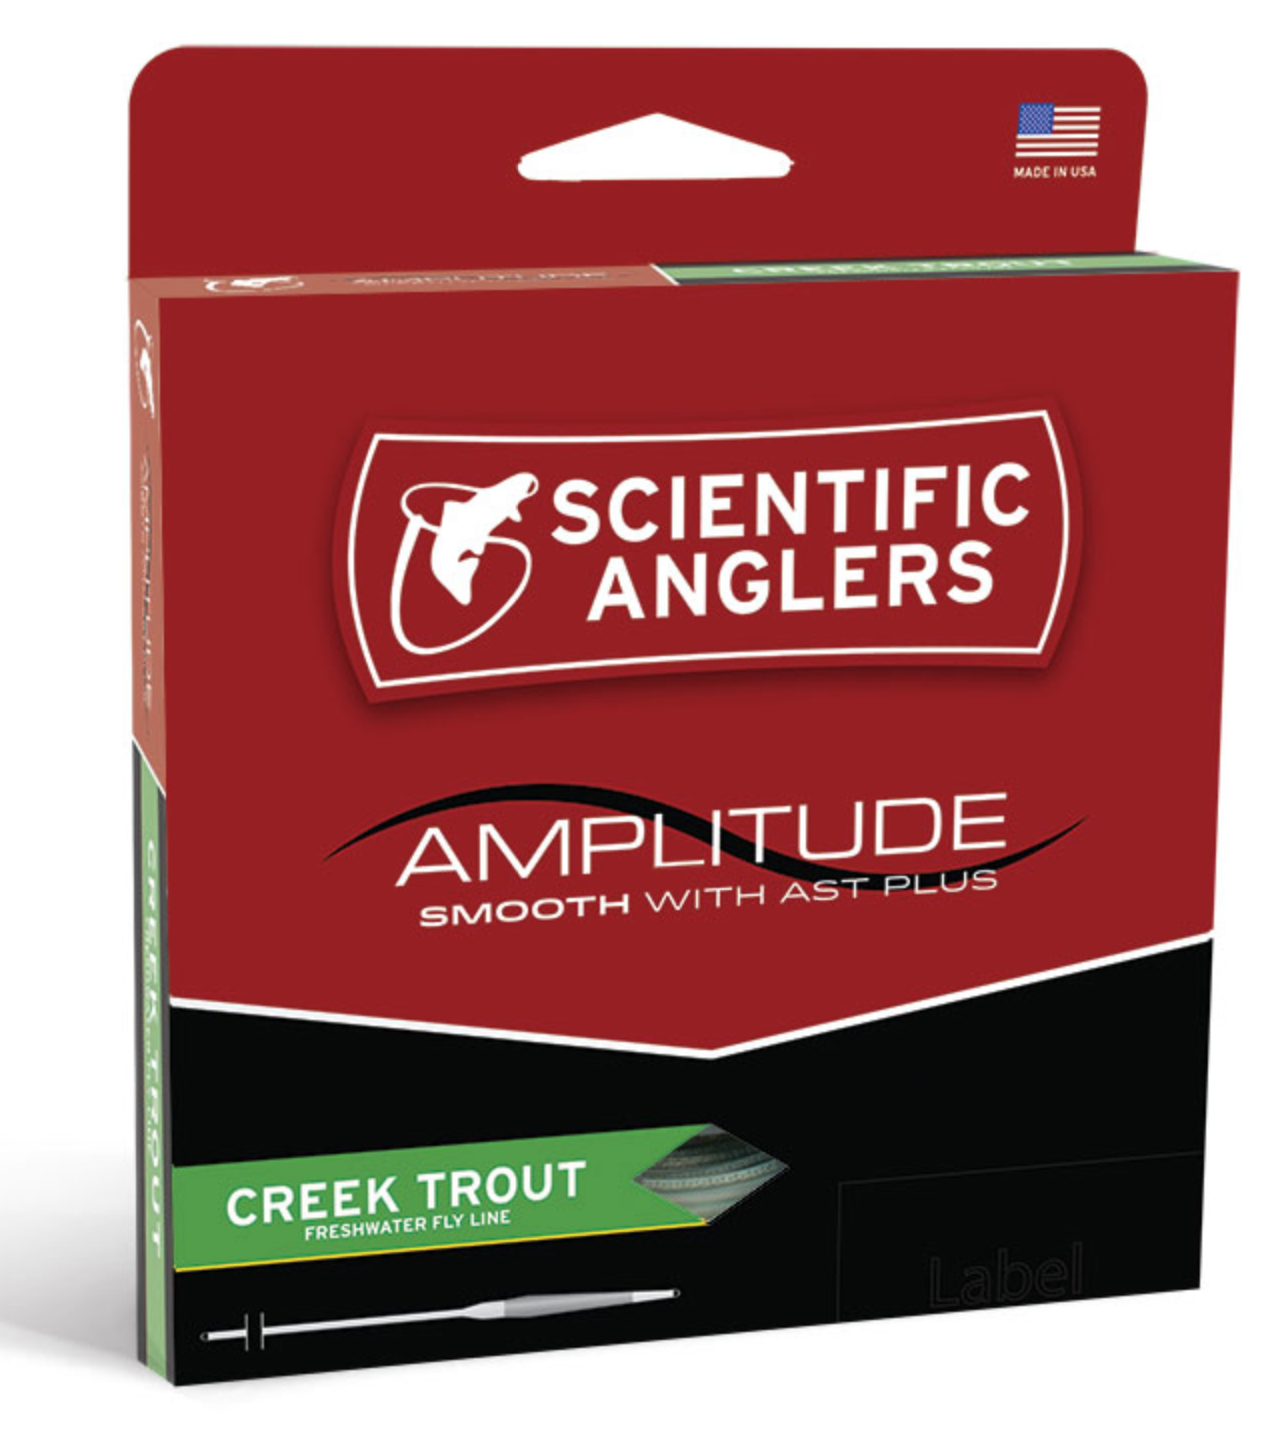 SCIENTIFIC ANGLERS AMPLITUDE SMOOTH CREEK TROUT, Floating, Fiume, Attrezzature